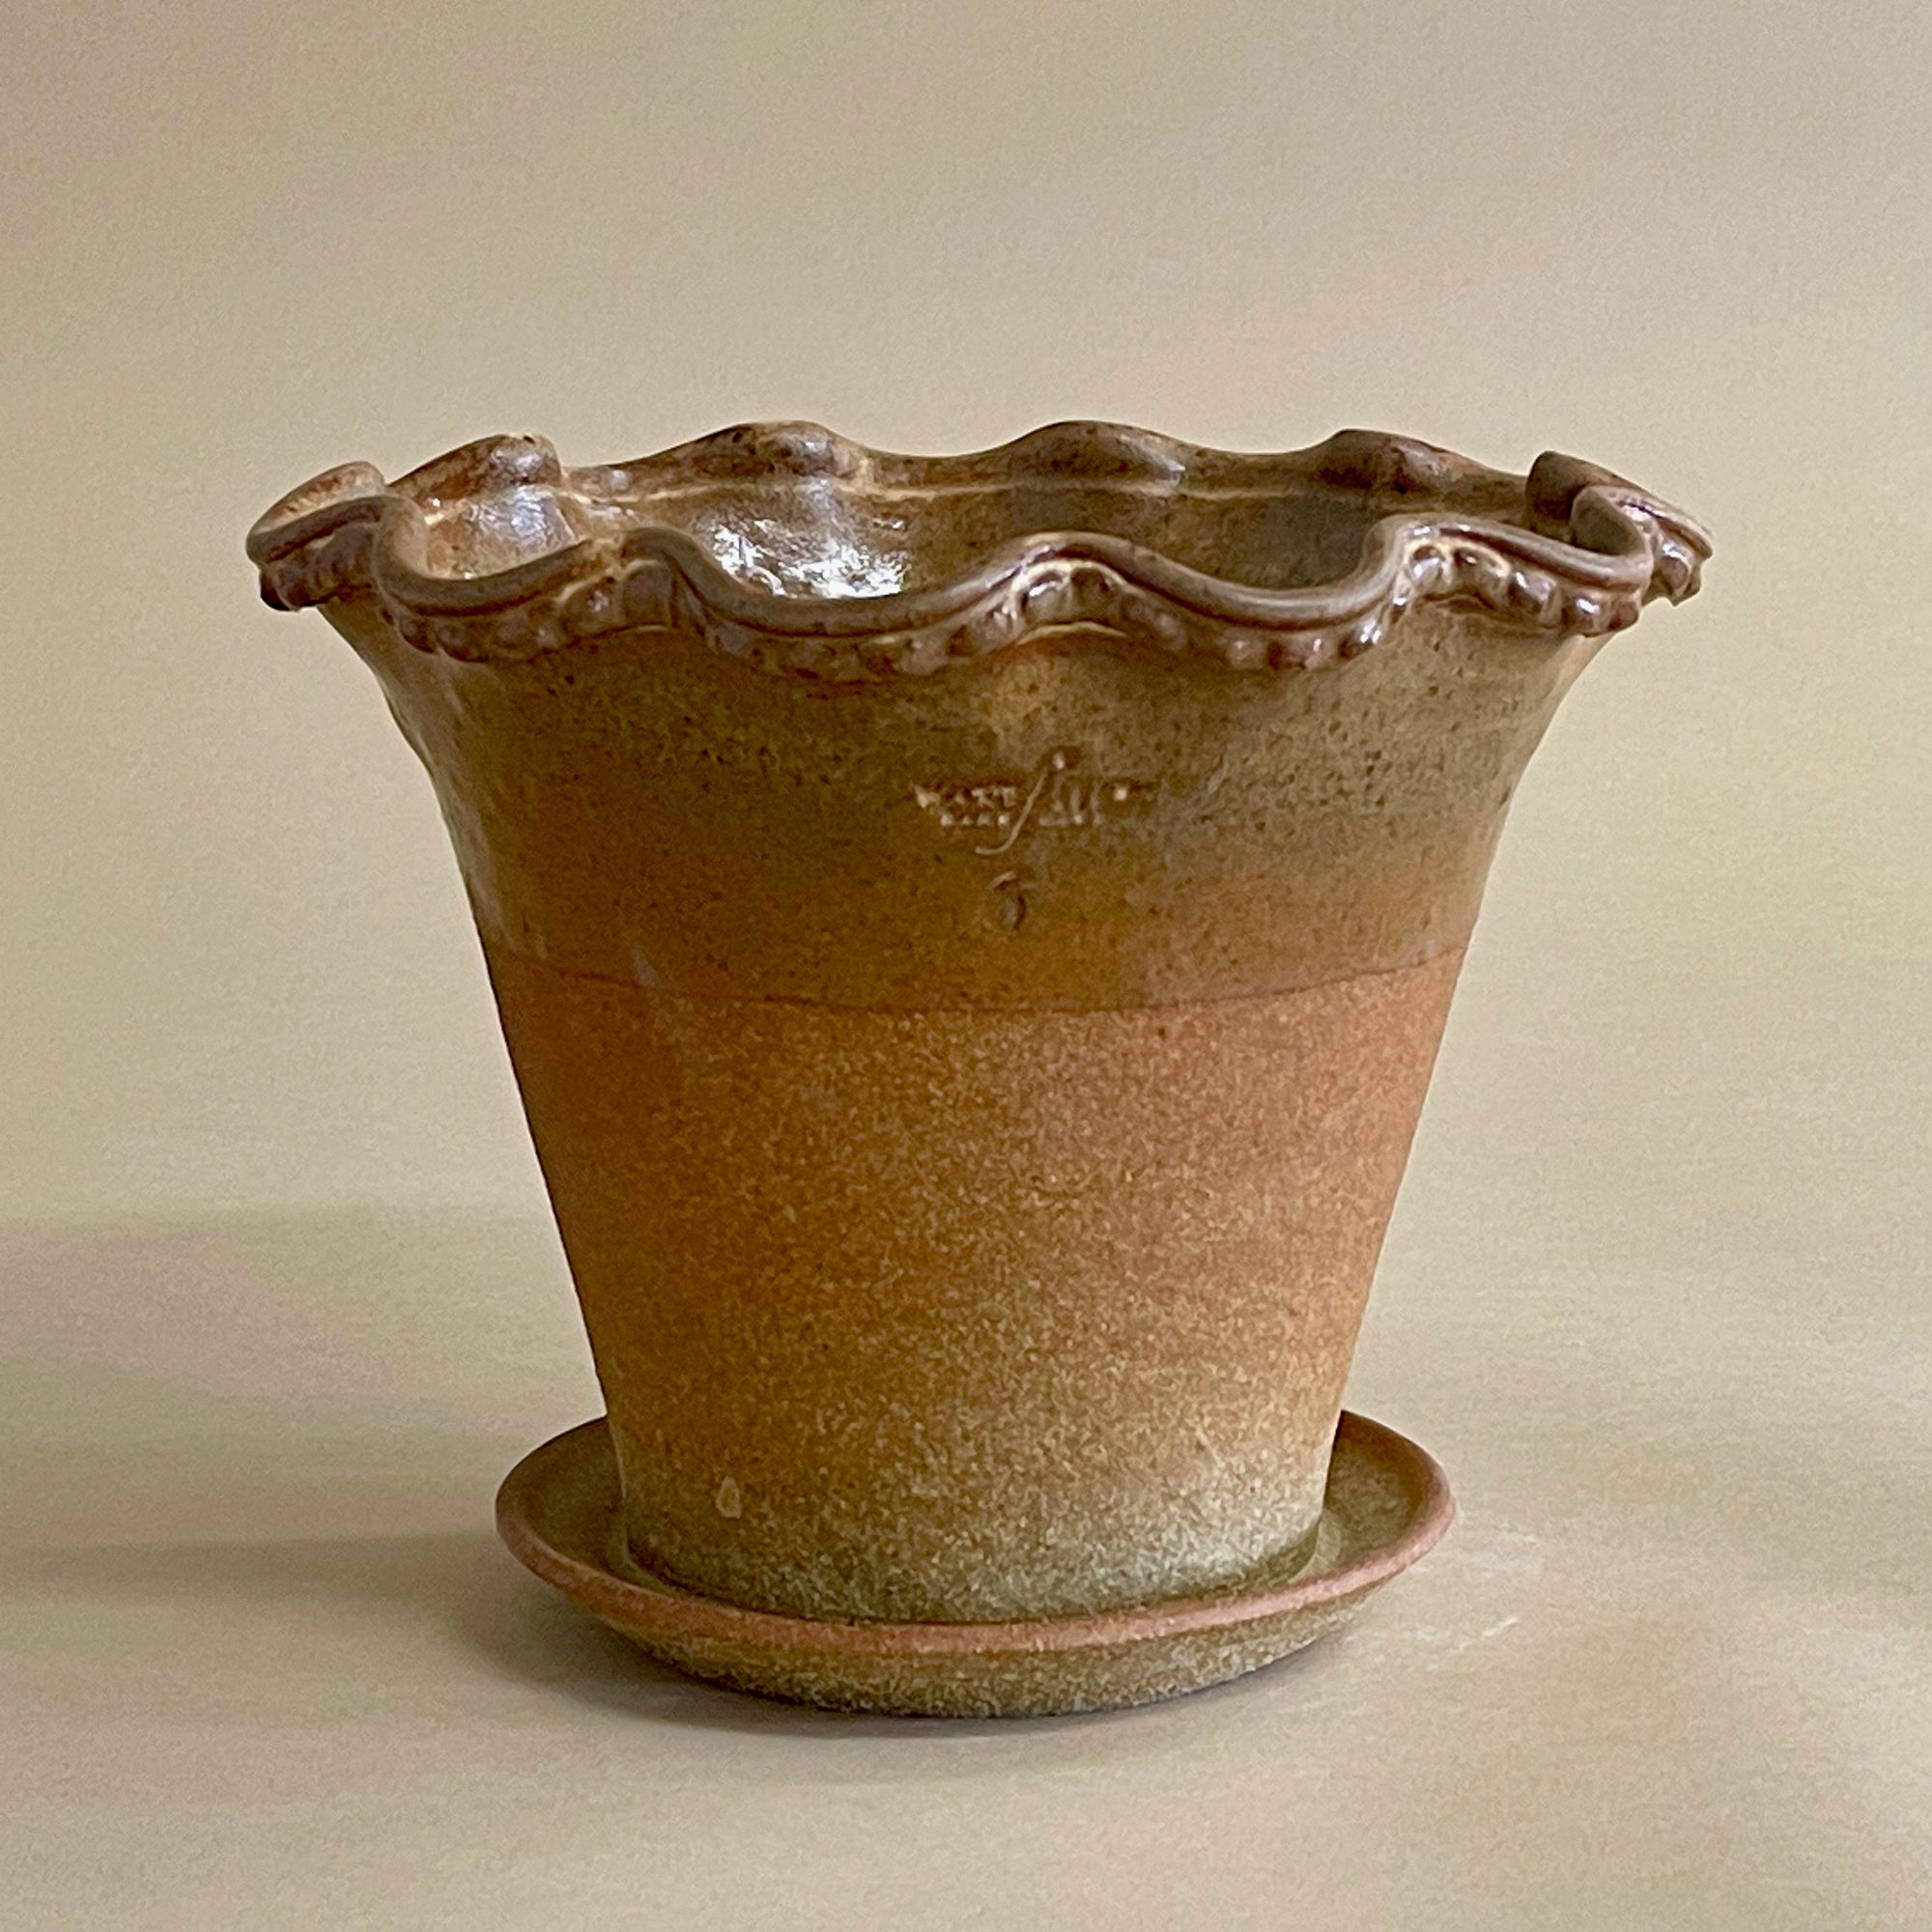 Scalloped Full Pot, Beaded Rim, with Attached Saucer